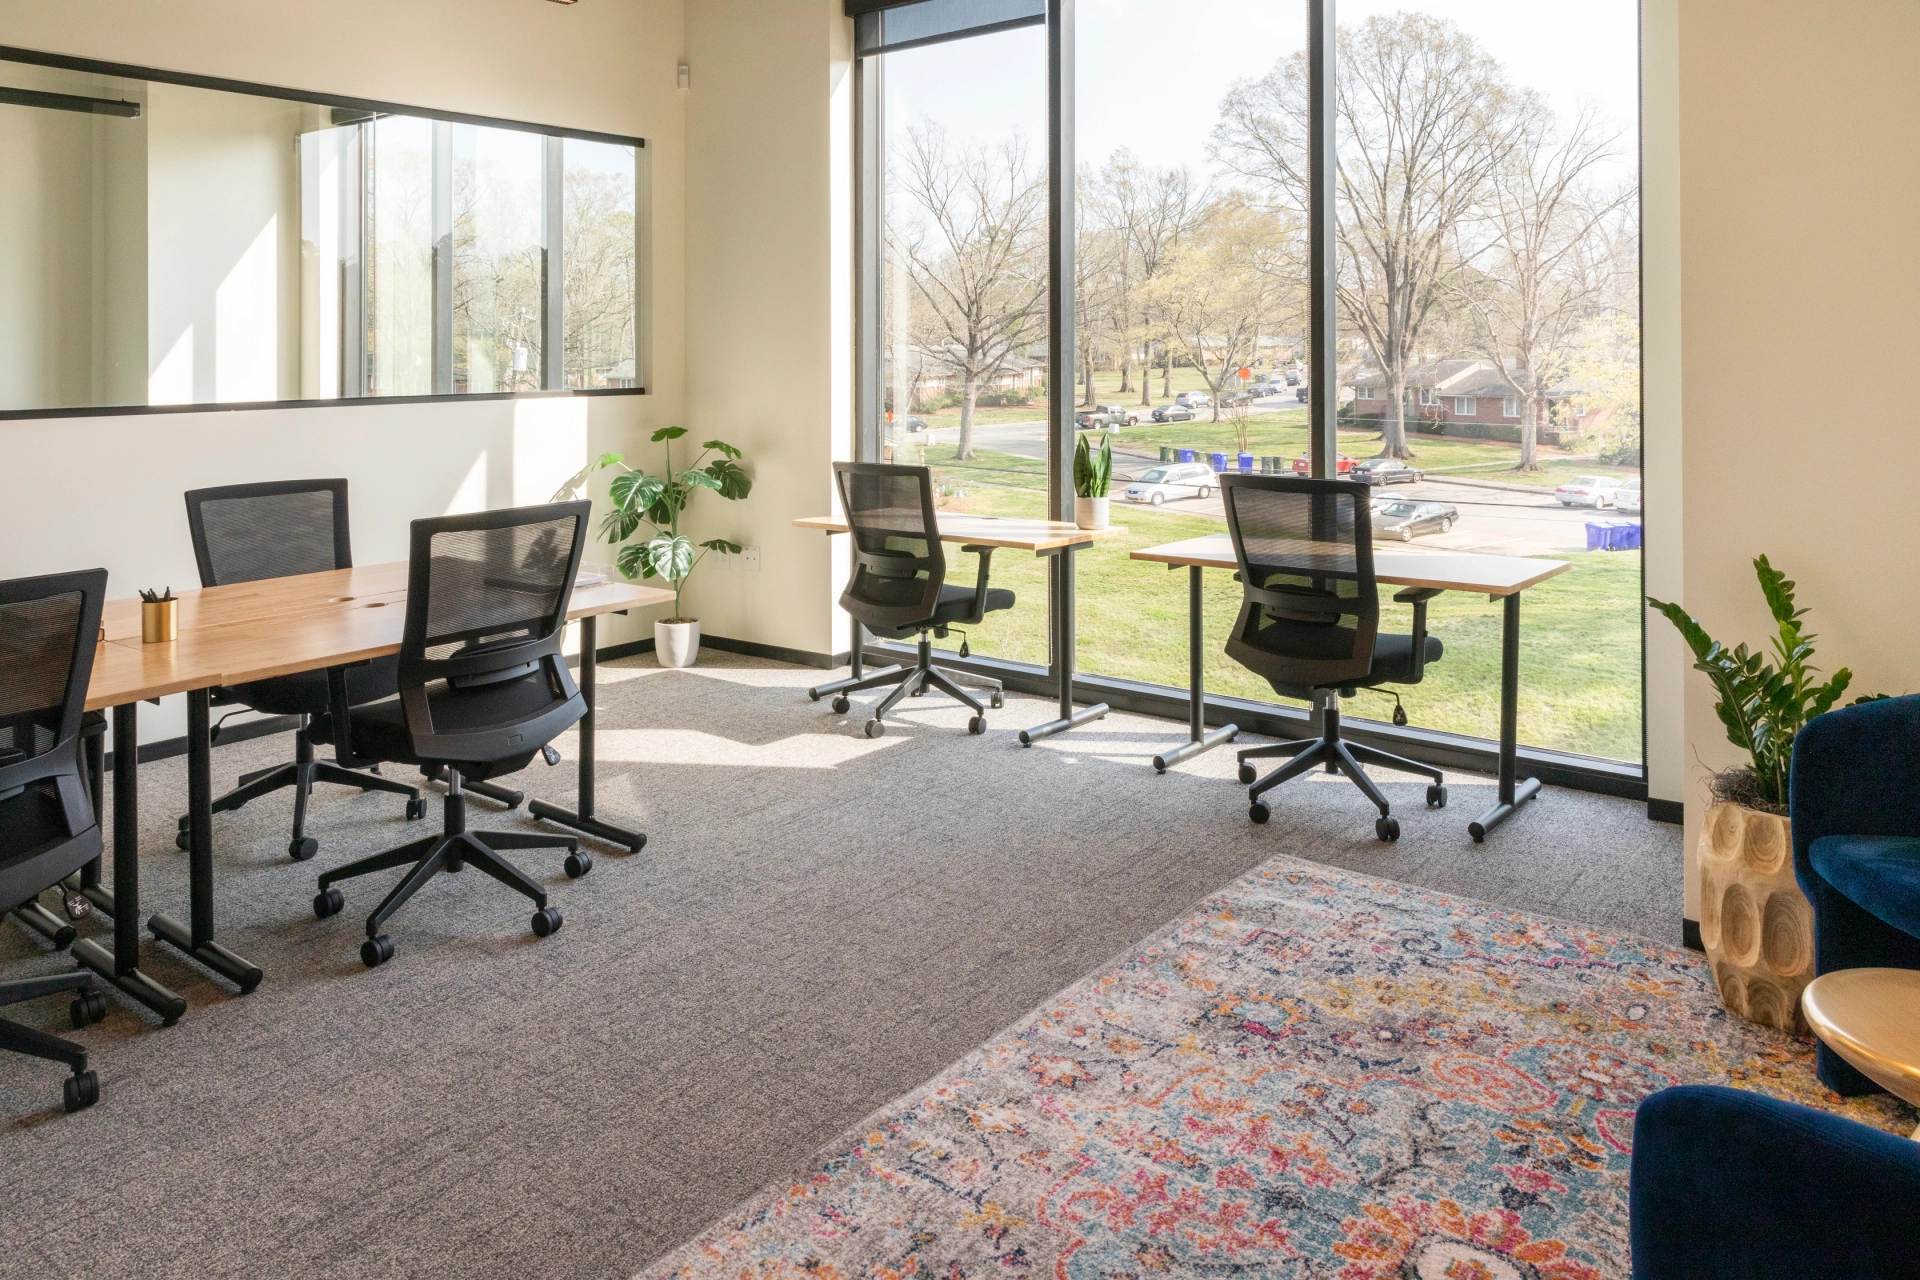 An office meeting room in Chapel Hill with desks and chairs facing a large window.